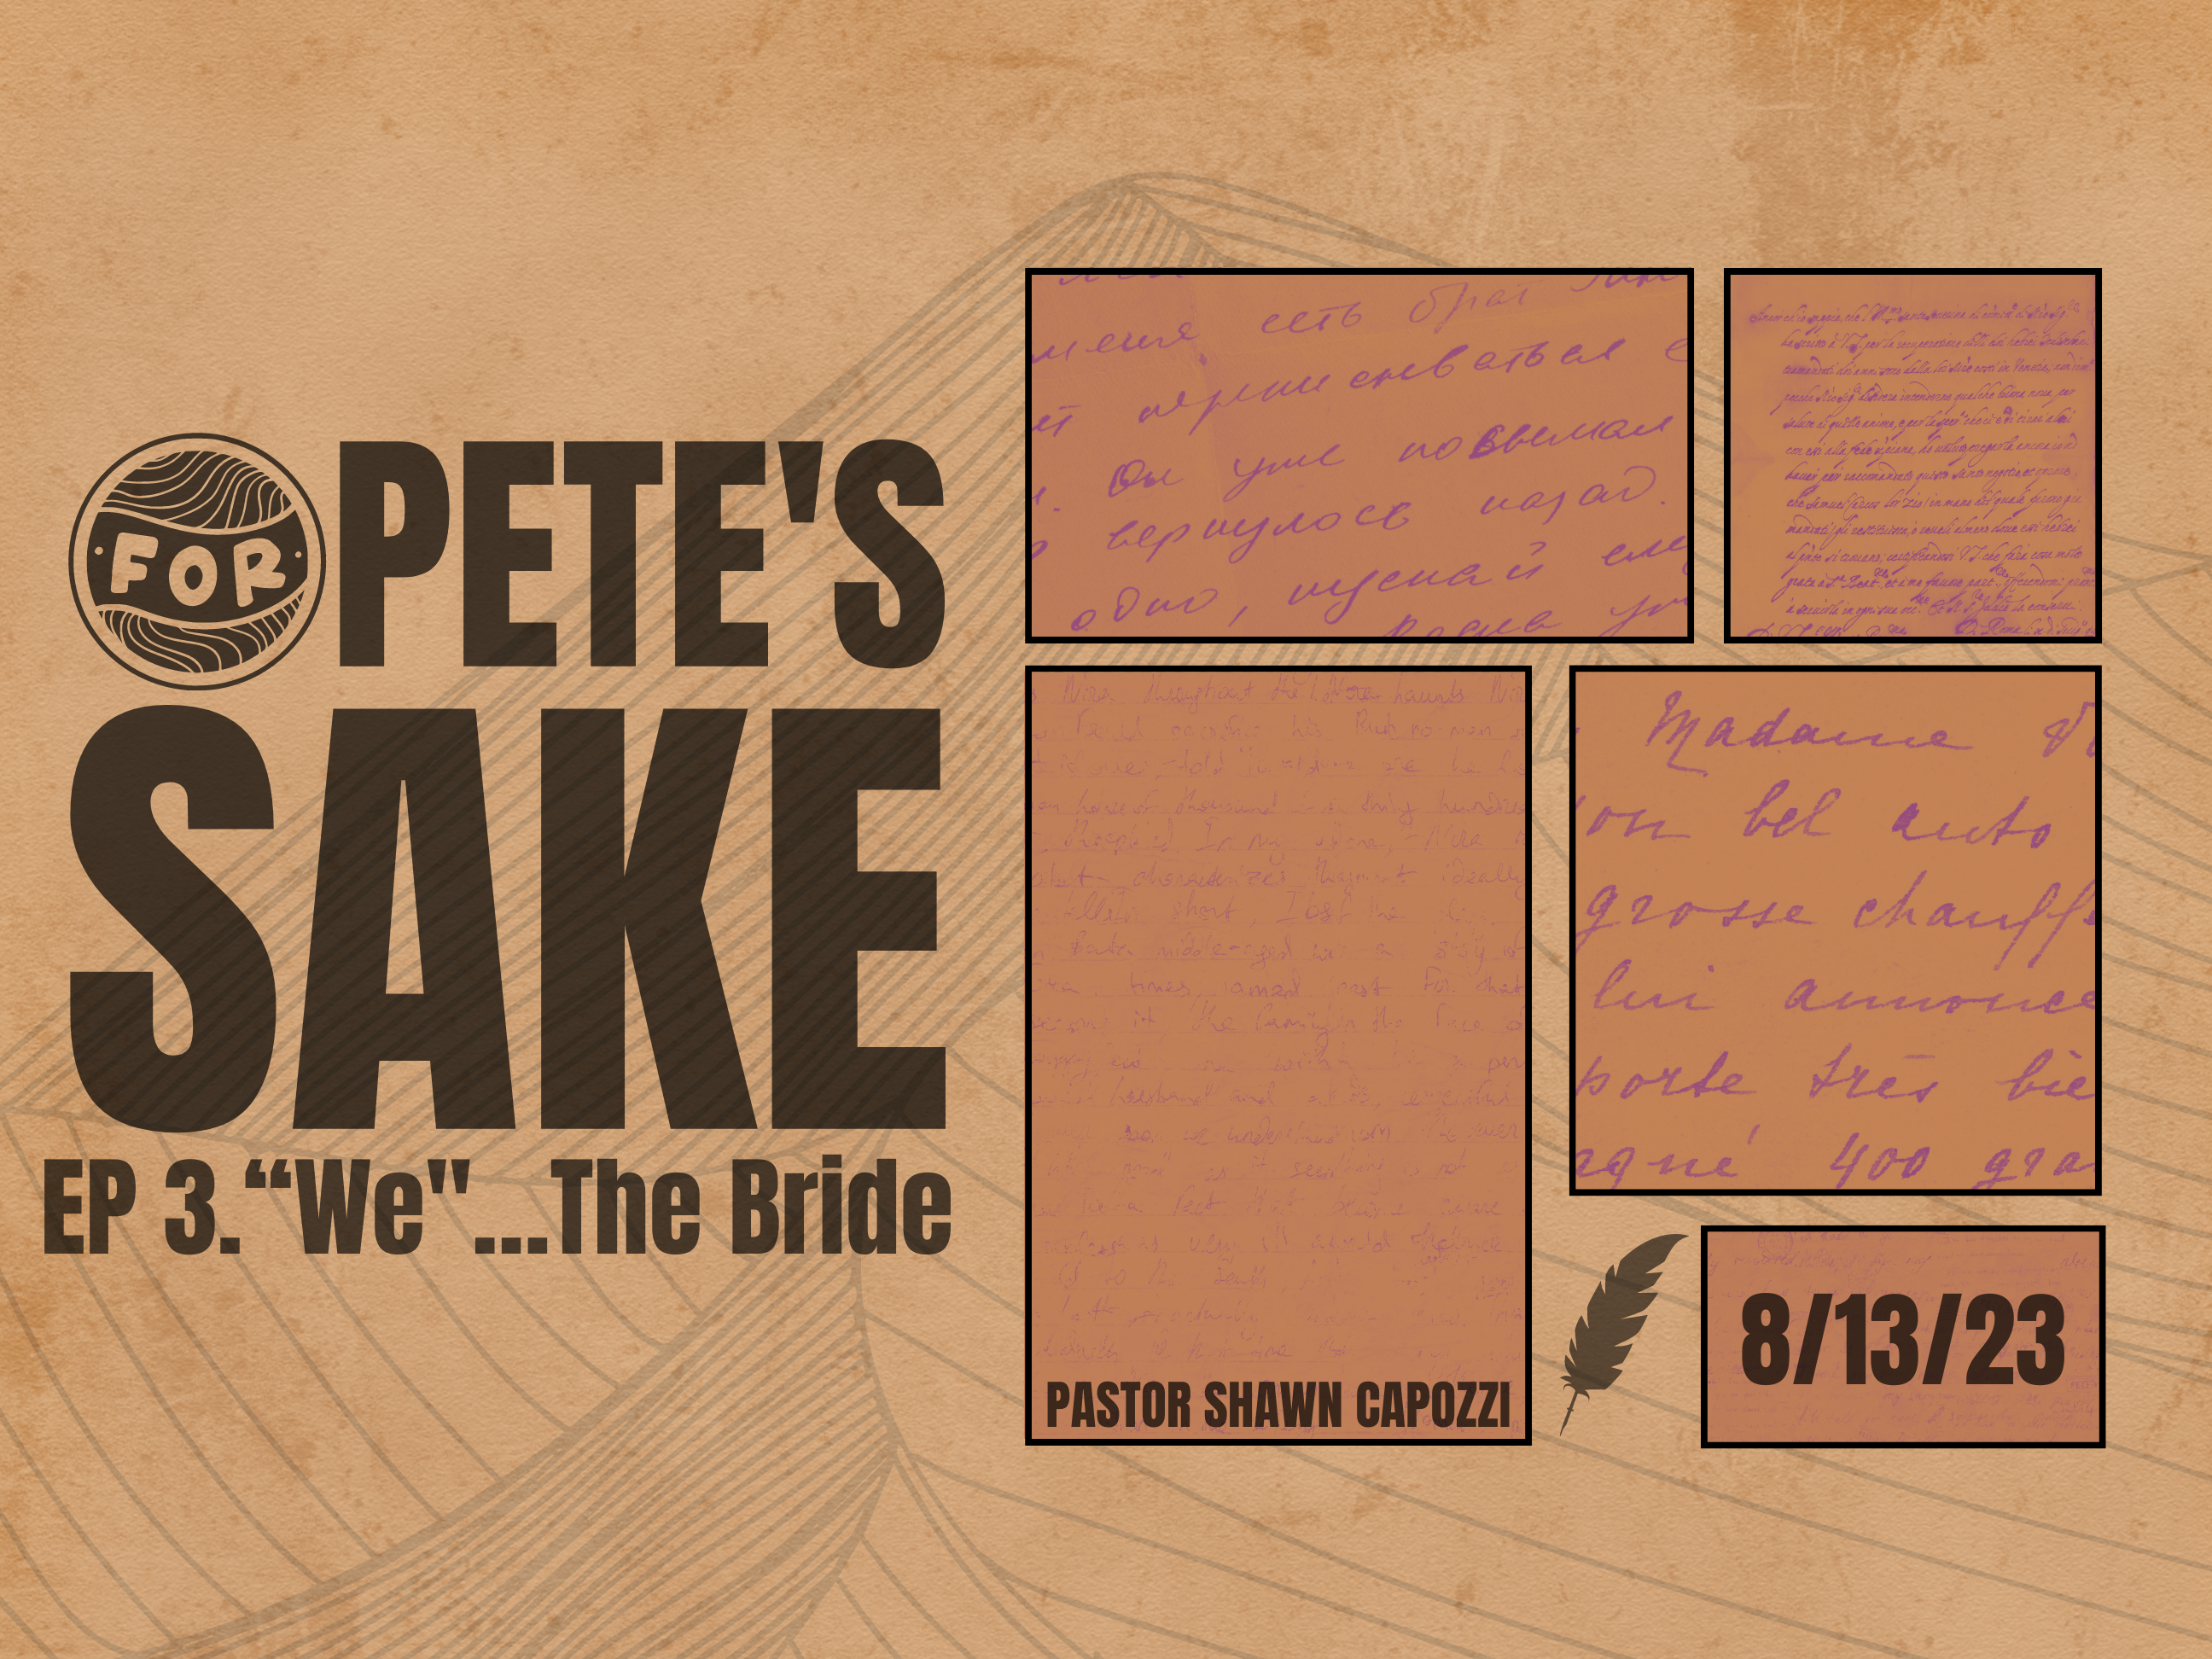 For Pete's Sake Ep. 3 "We the Bride"